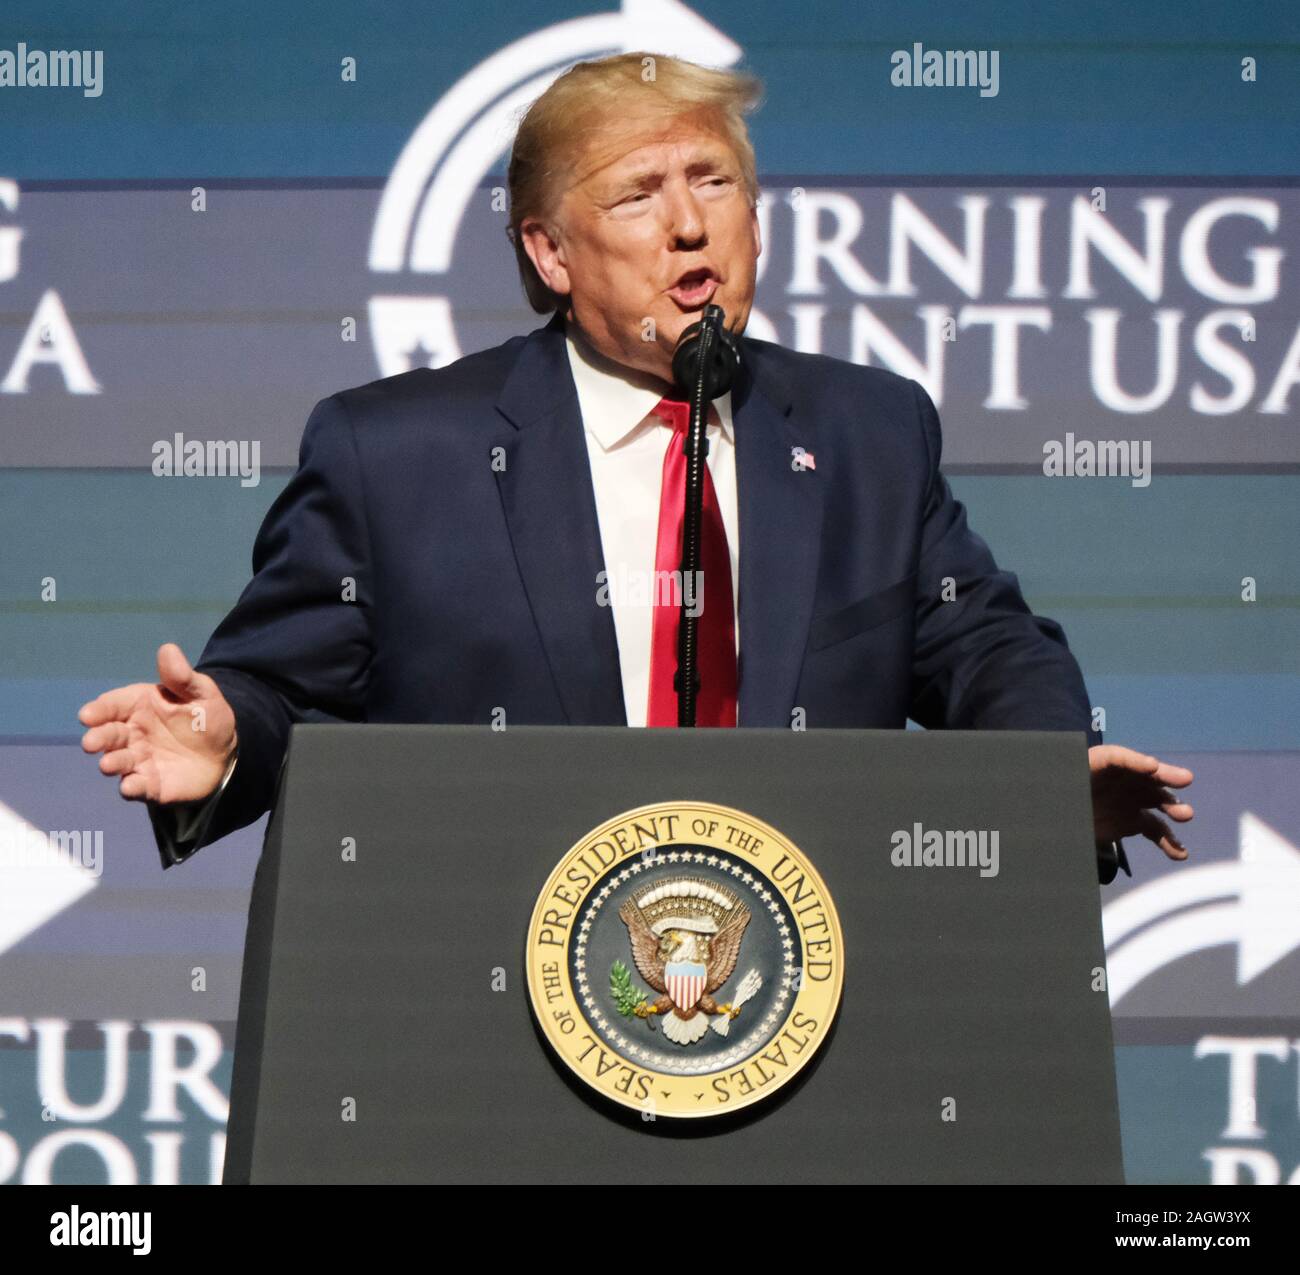 West Palm Beach, USA. 21st Dec, 2019. USA President Donald J.Trump speaks at the Turning Point USA conference for young conservatives at the Palm Beach Convention Center in West Palm Beach, Florida on Saturday, December 21, 2019. On Wednesday, December 18, 2019, President Donald Trump was the third U.S. President to be impeached by the House of Representatives. Photo by Gary I Rothstein/UPI Credit: UPI/Alamy Live News Stock Photo